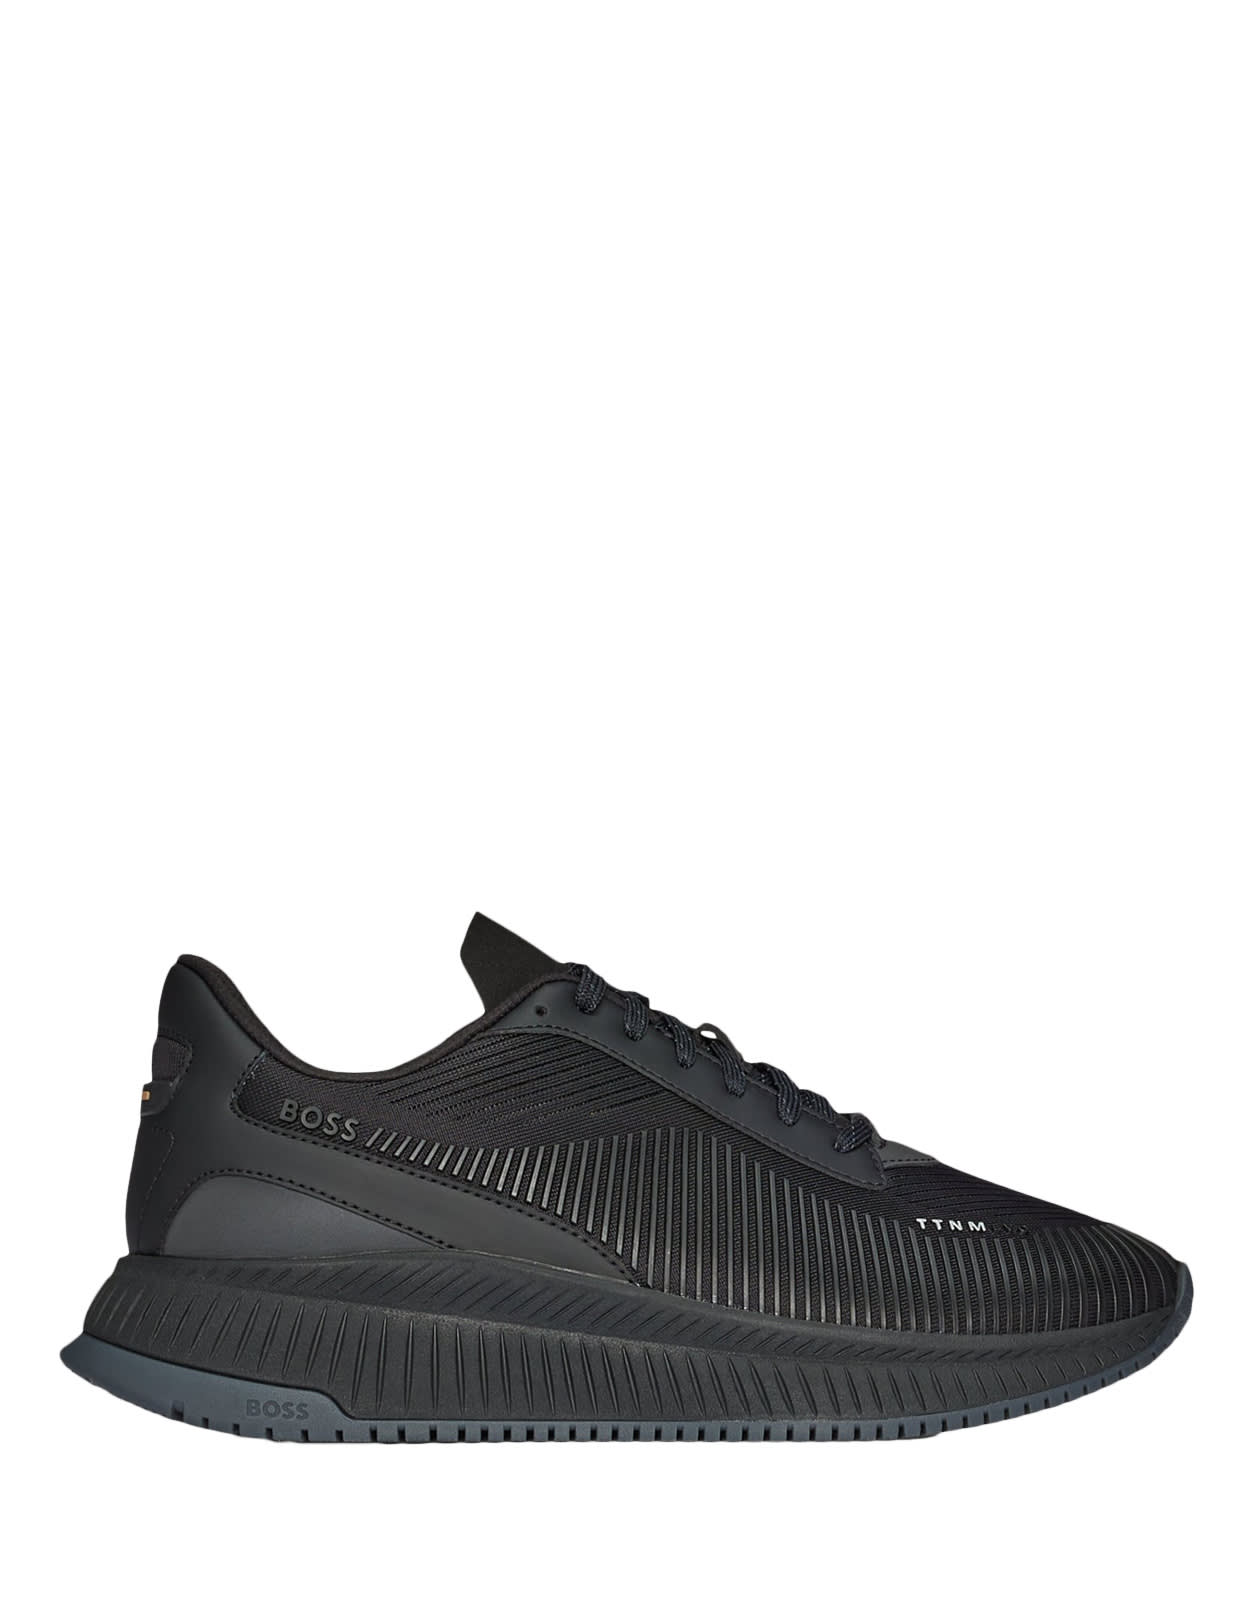 Hugo Boss Black Sneakers In Mixed Materials With Rubberized Leather Inserts